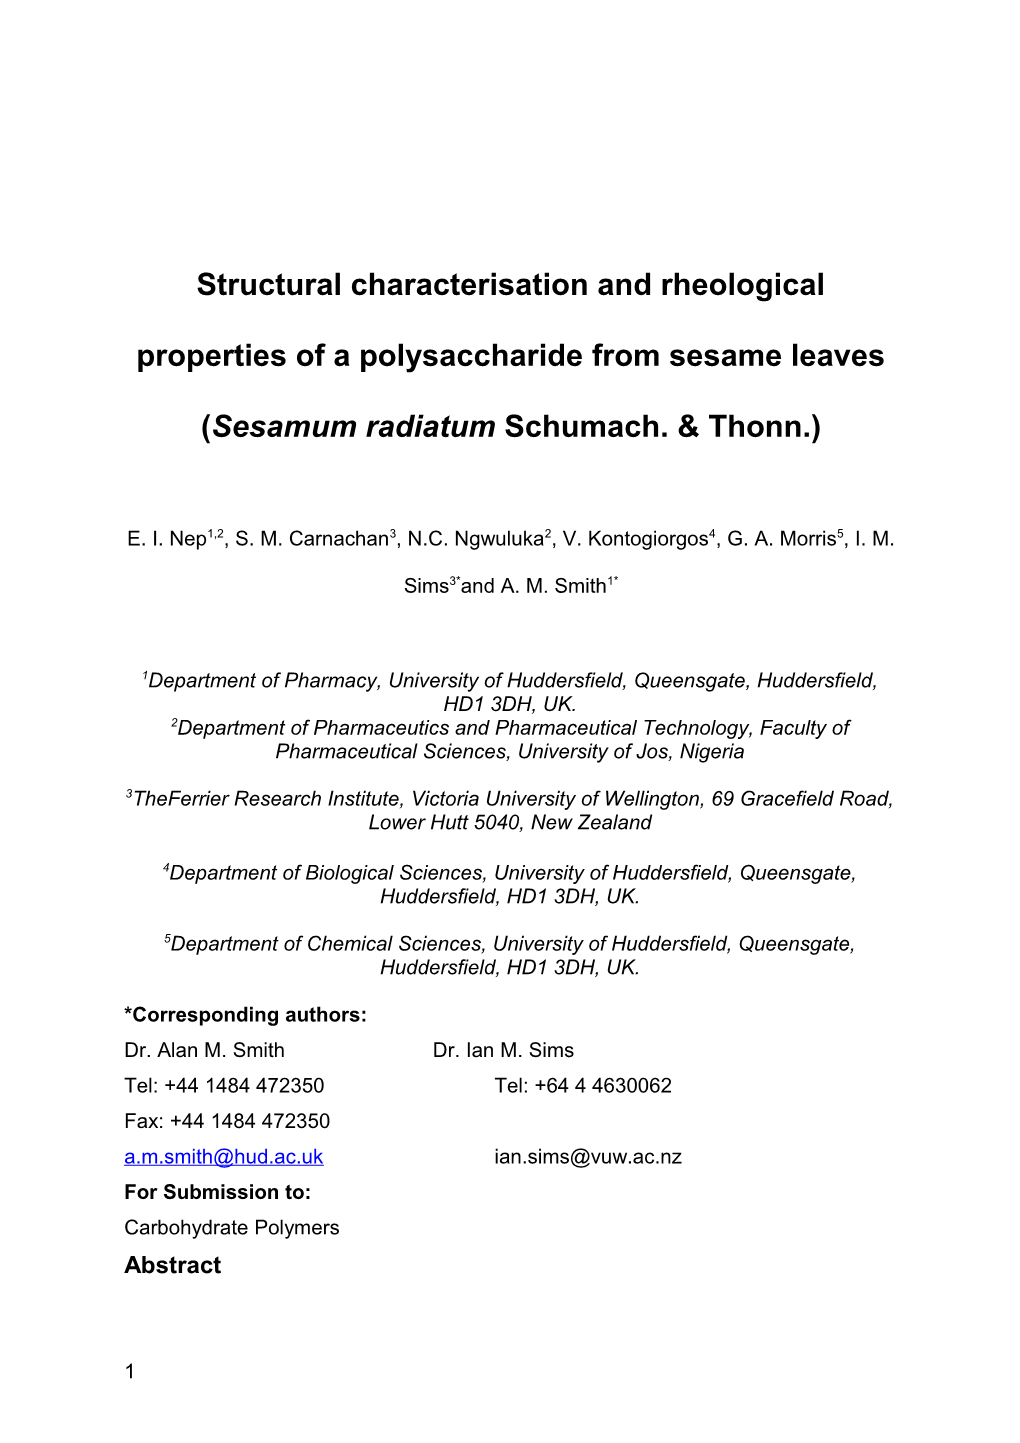 Structural Characterisation and Rheological Properties of a Polysaccharide from Sesame